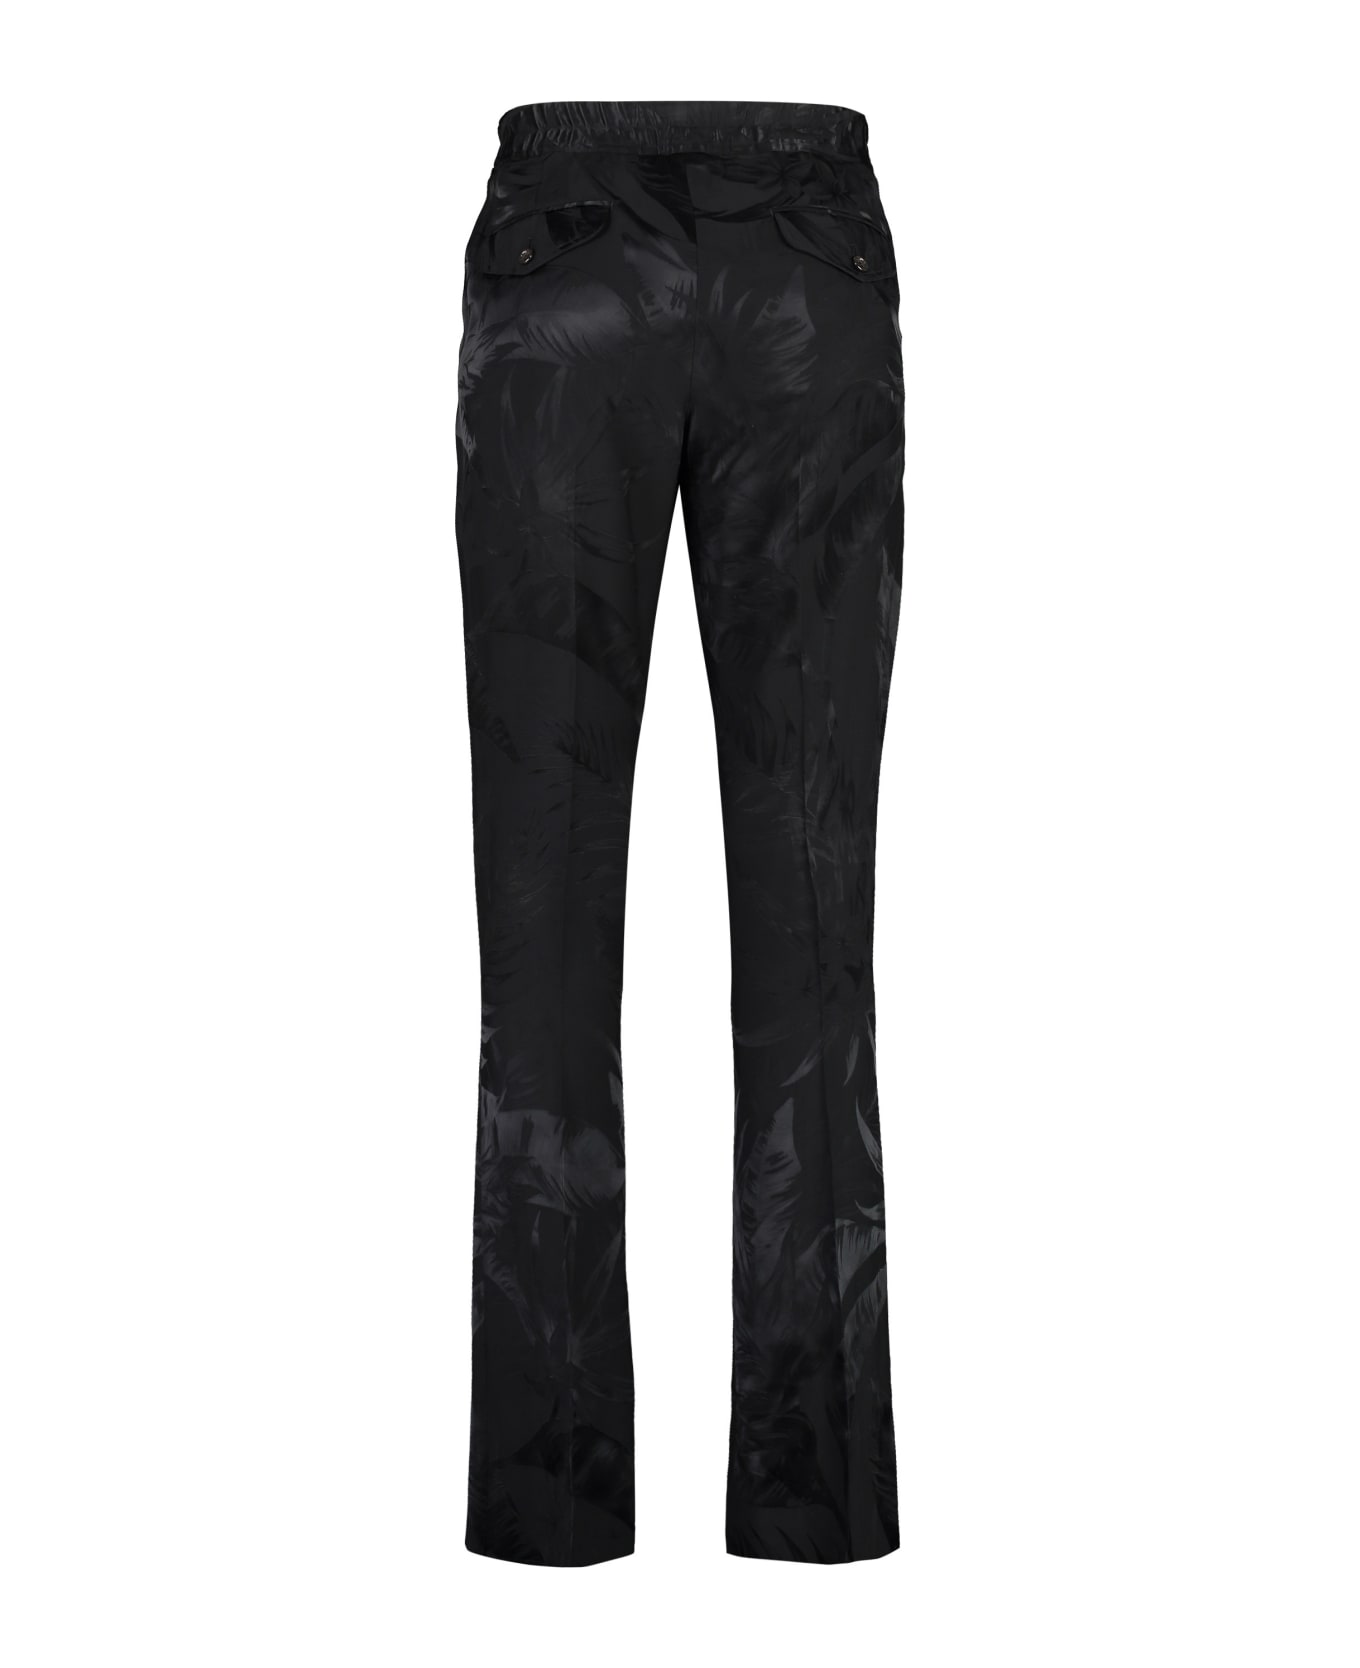 Tom Ford Viscose Trousers - black ボトムス